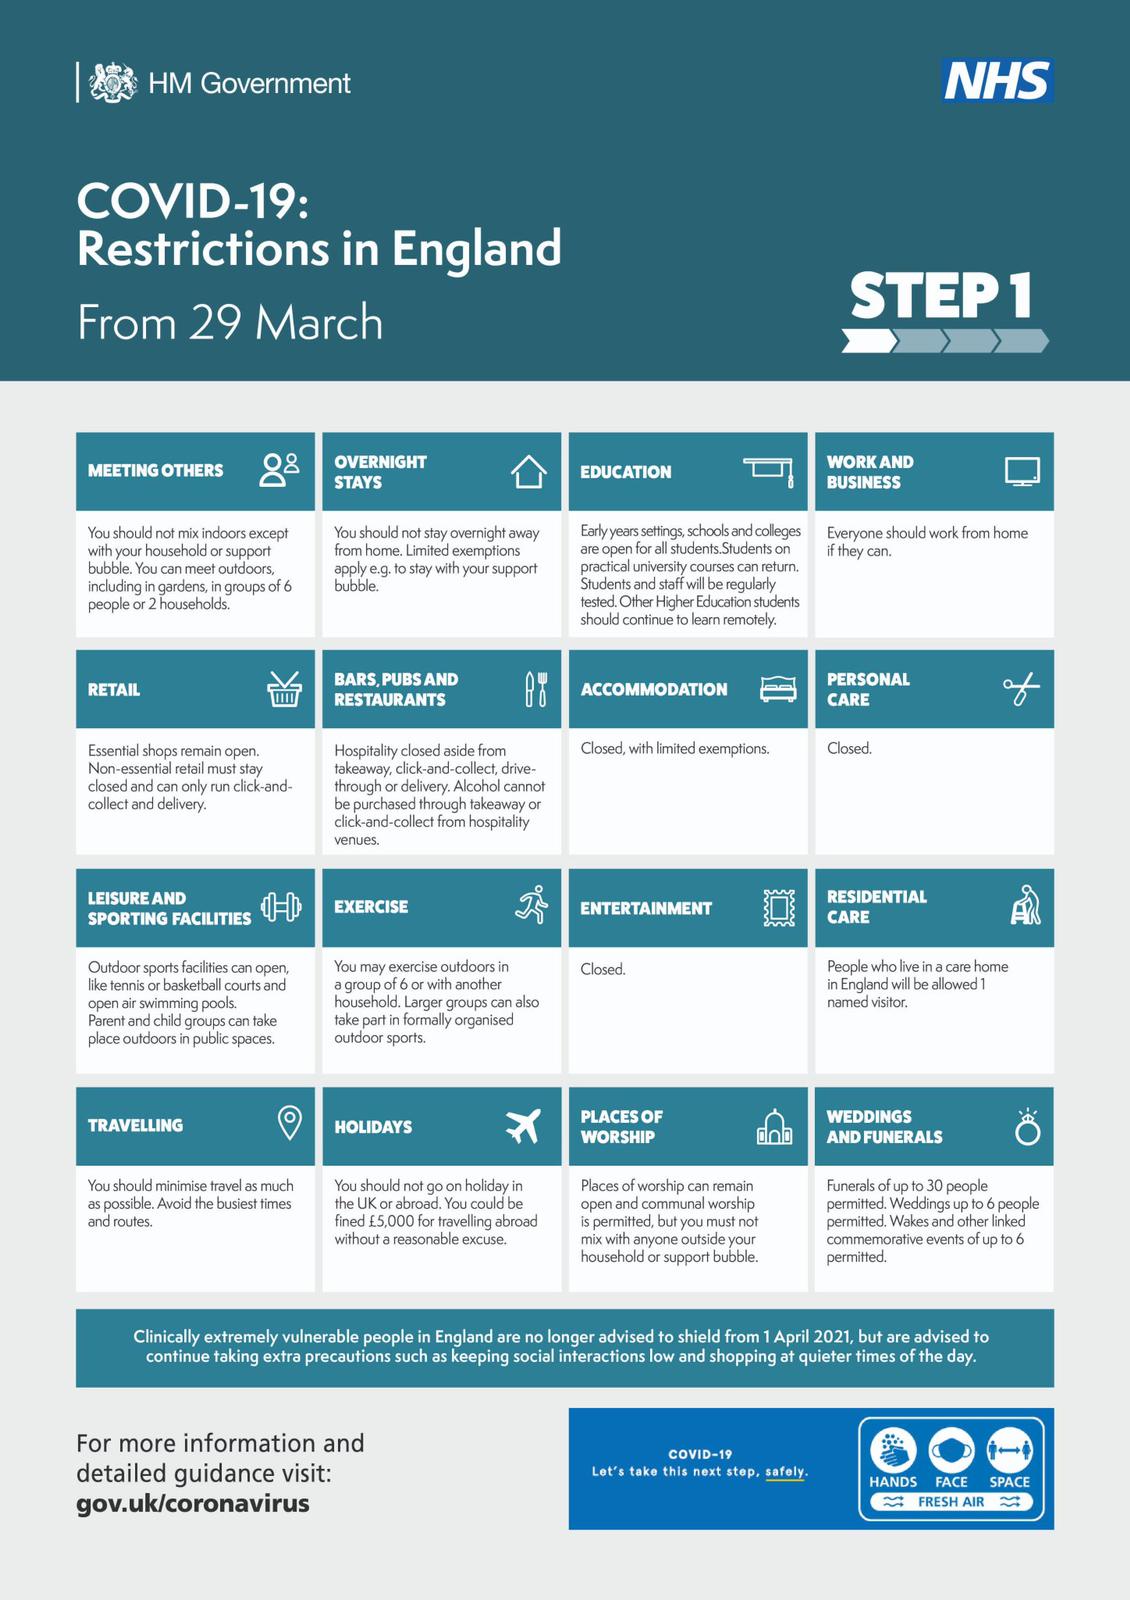 29th March restrictions